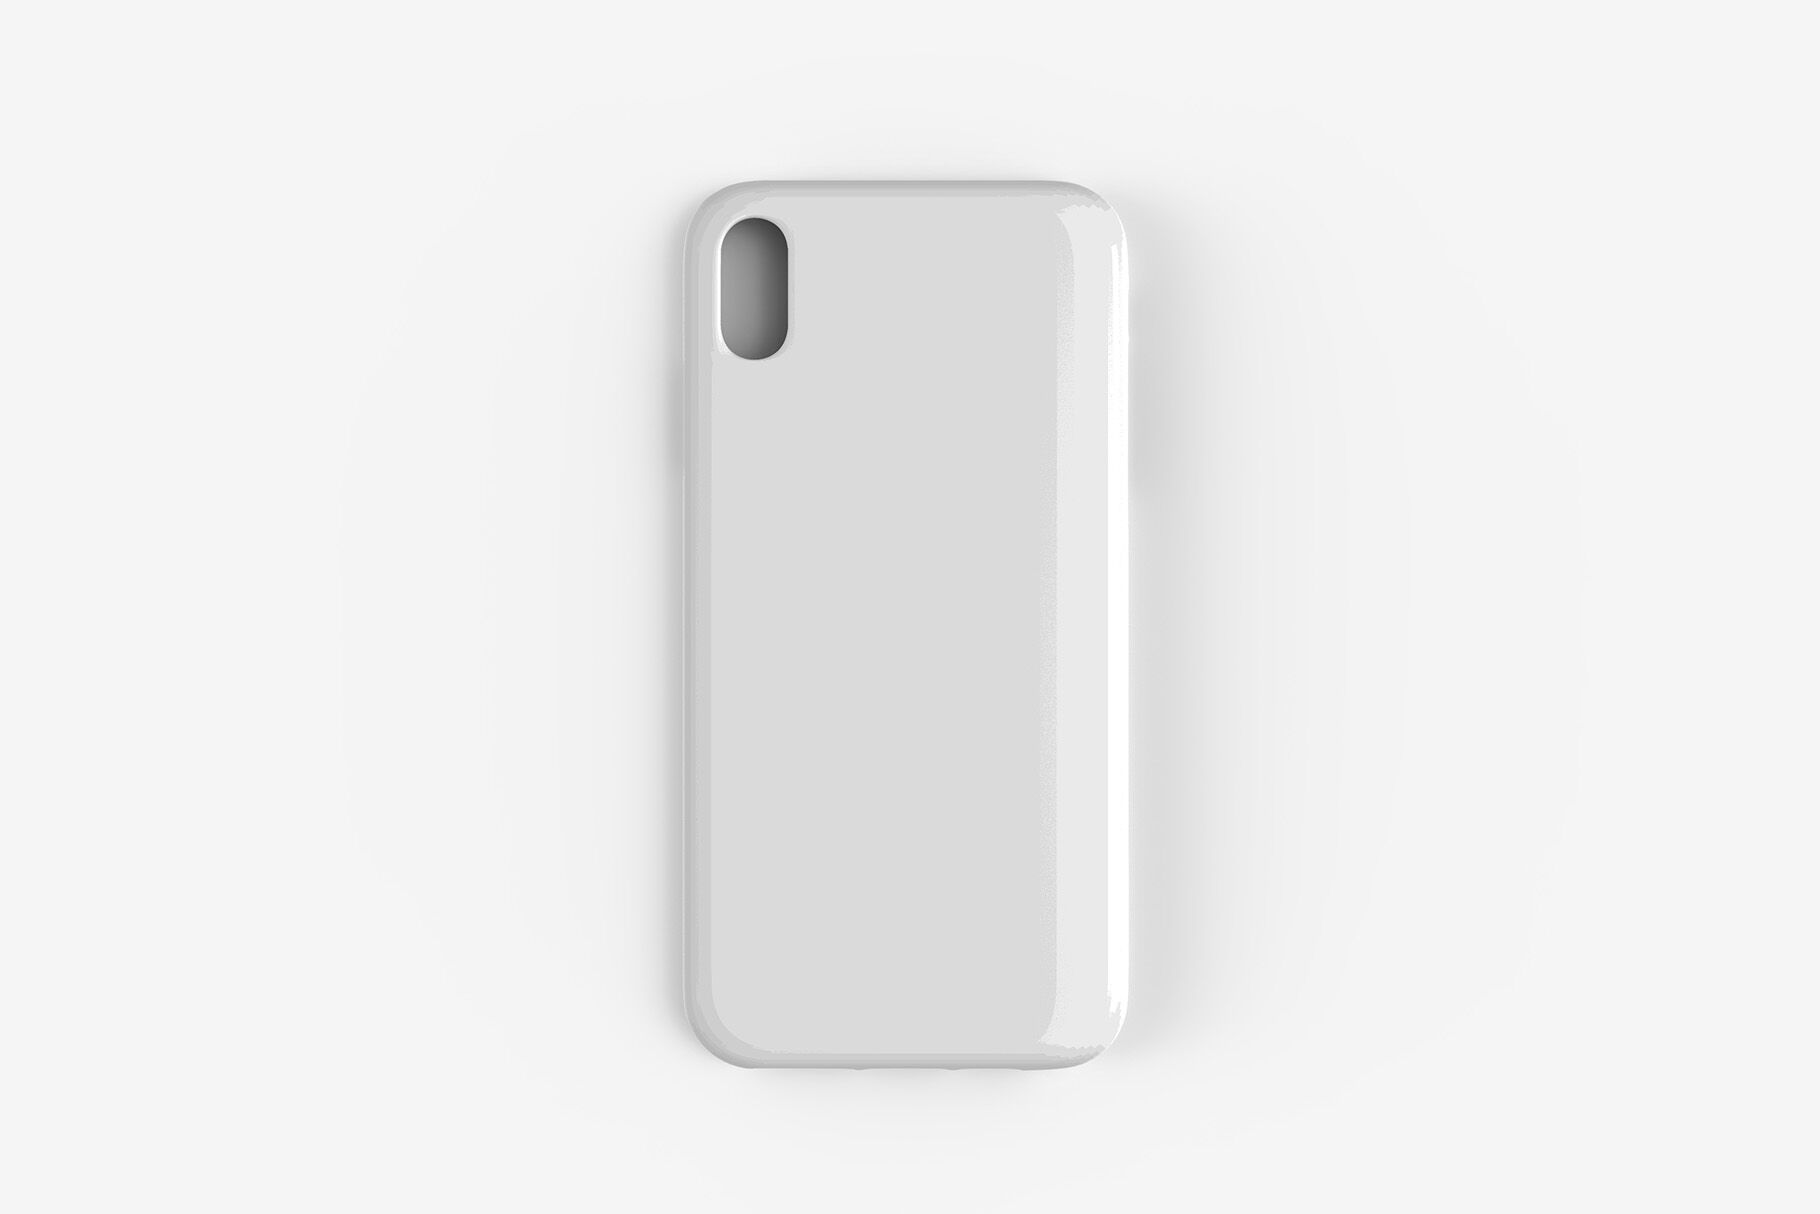 Phone Case Mockup - 8 Views By Illusiongraphic ...